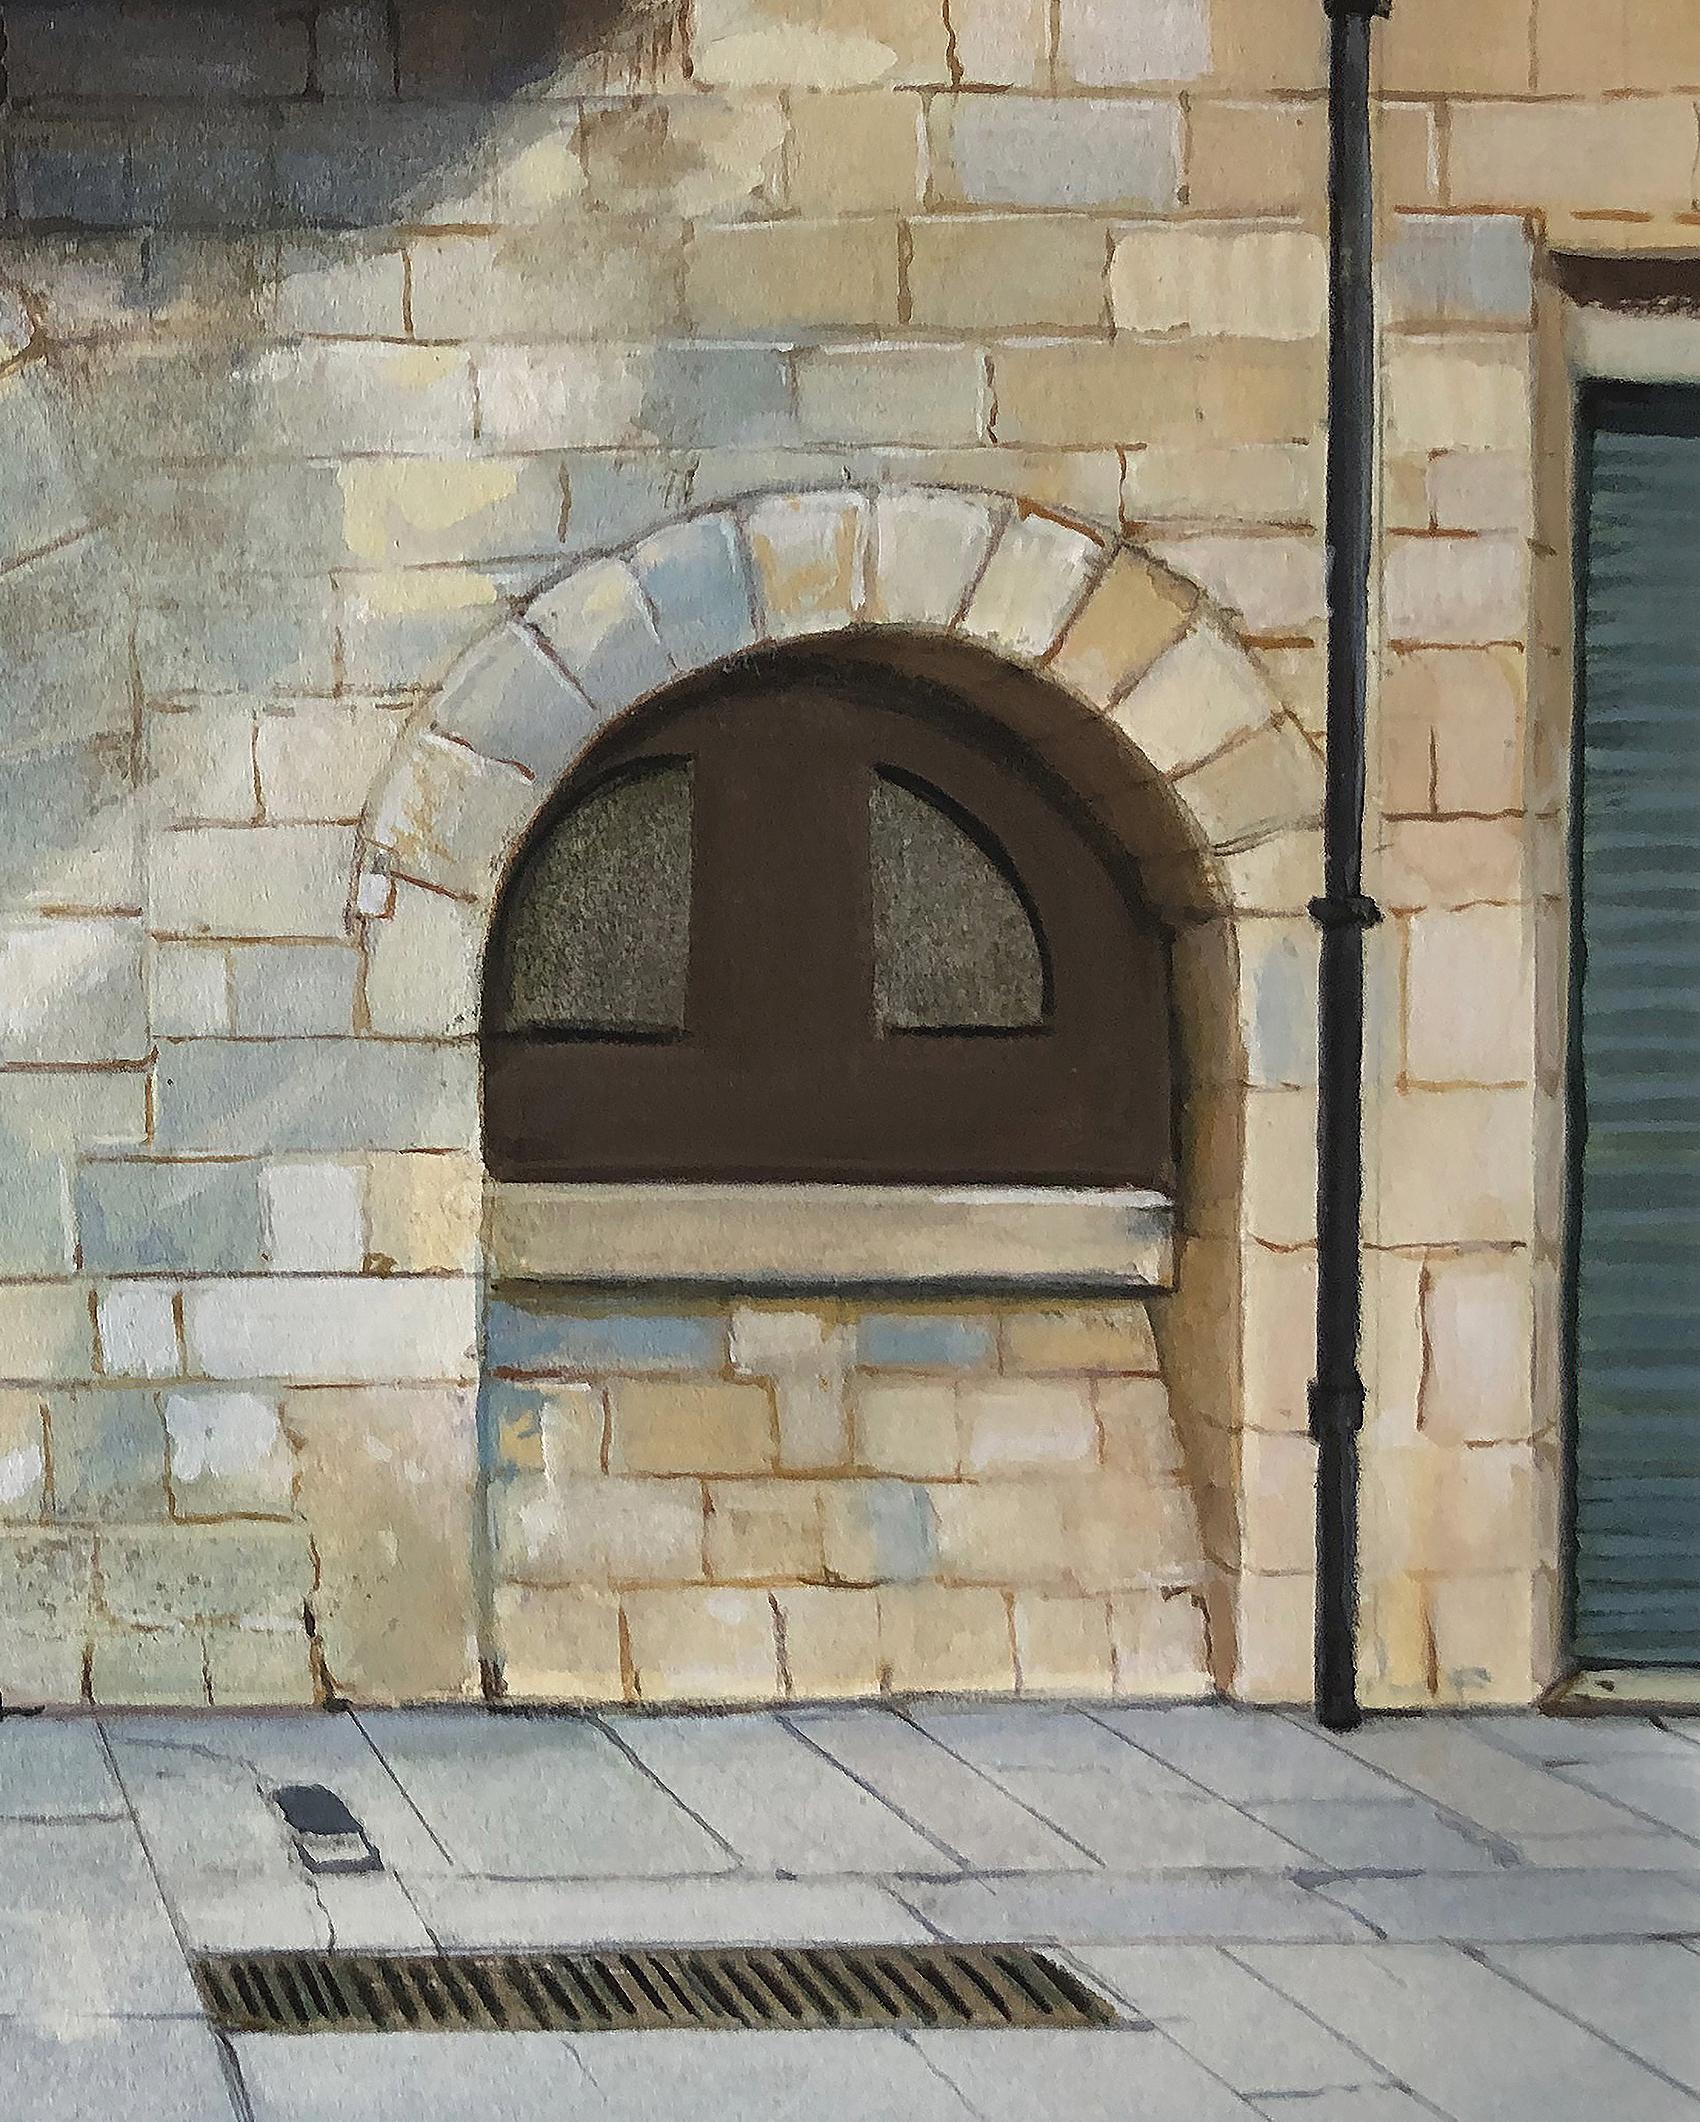 Aquardar (Waiting Expectantly) - Architectural Imagery, Doorways, Dappled Light - Contemporary Art by Carol Pylant